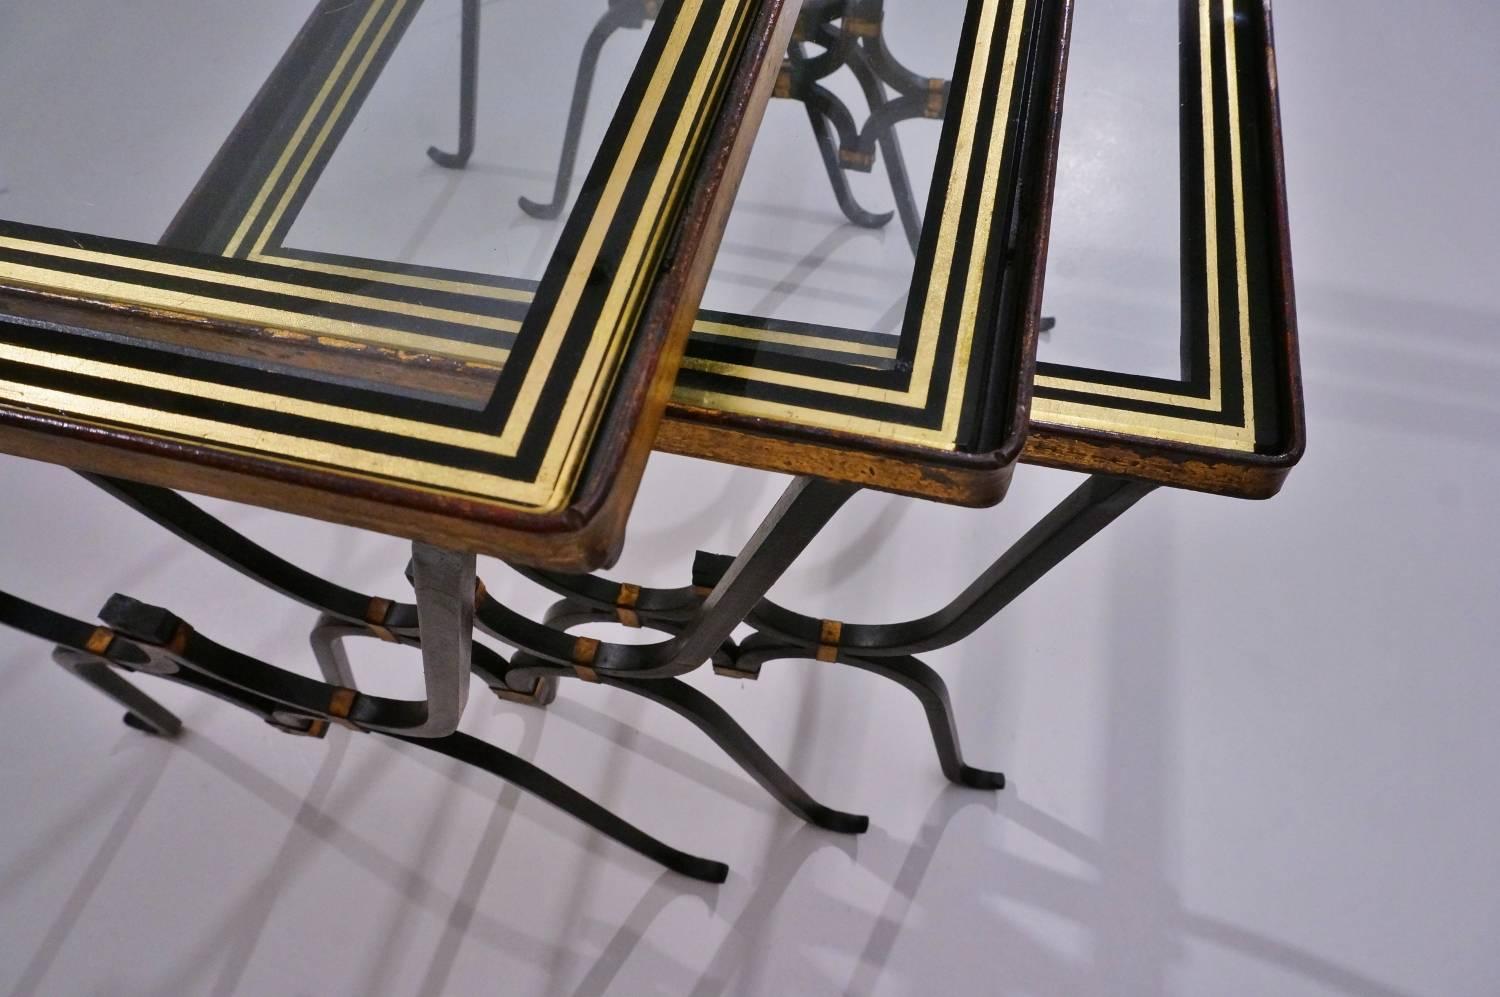 Art Deco Rene Drouet Nesting Tables, Gilt Iron and Gold Leaf Glass Tops, French